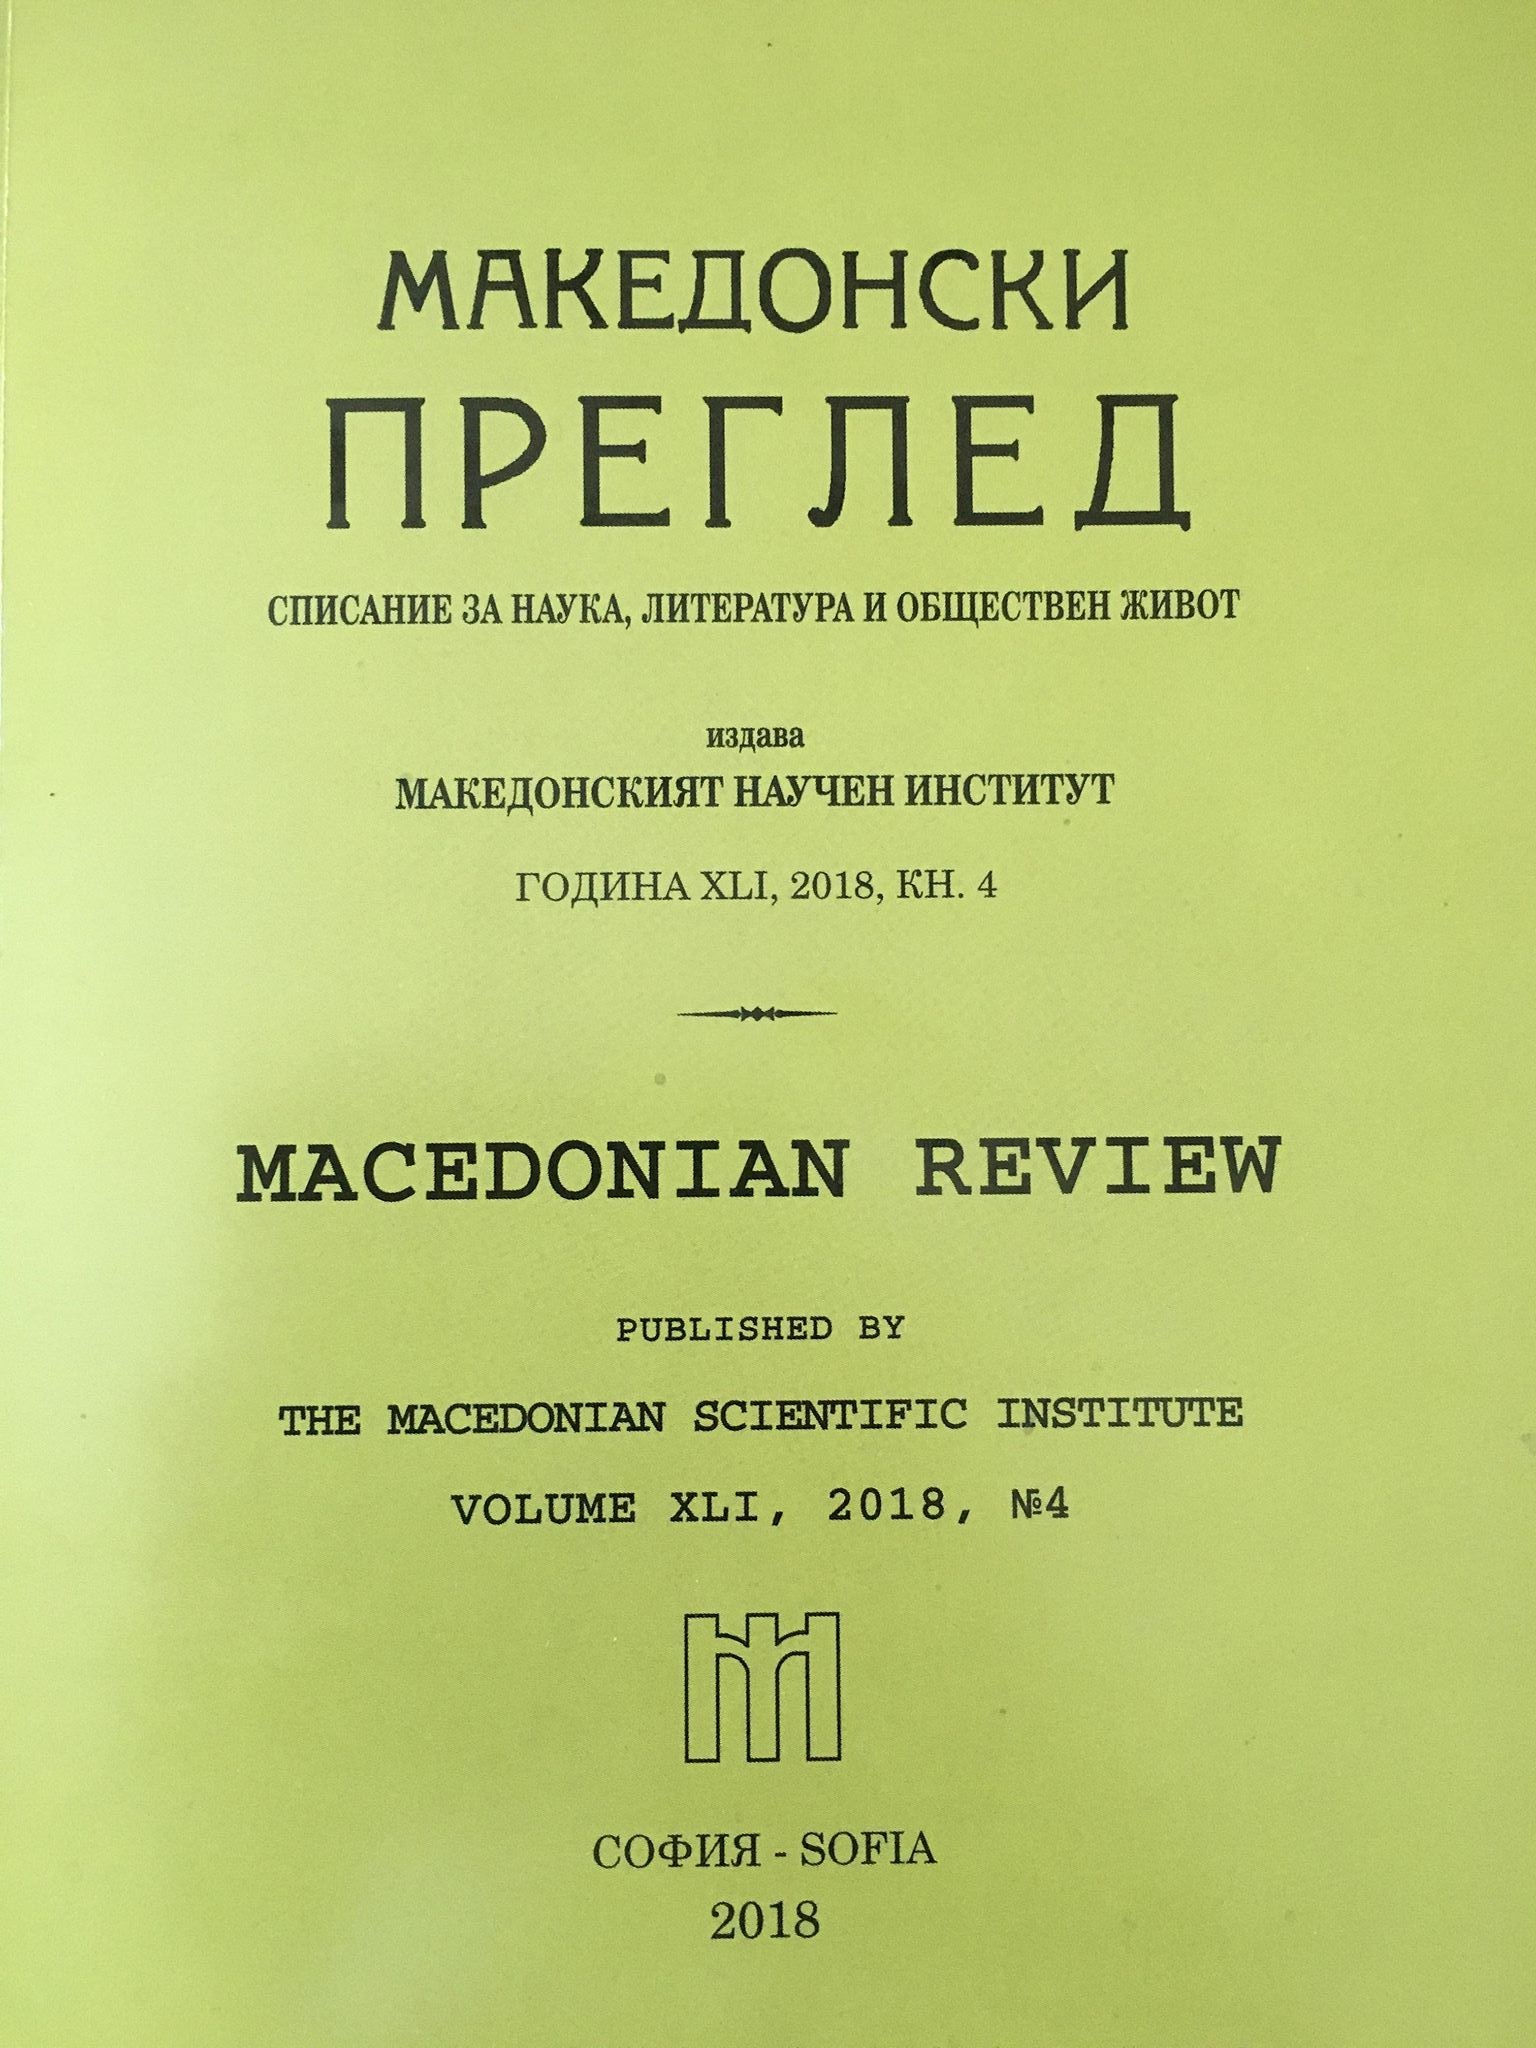 The Ethnical Structure of the Population in Western Macedonia in the Second World War According to Official Albanian Statistics Cover Image